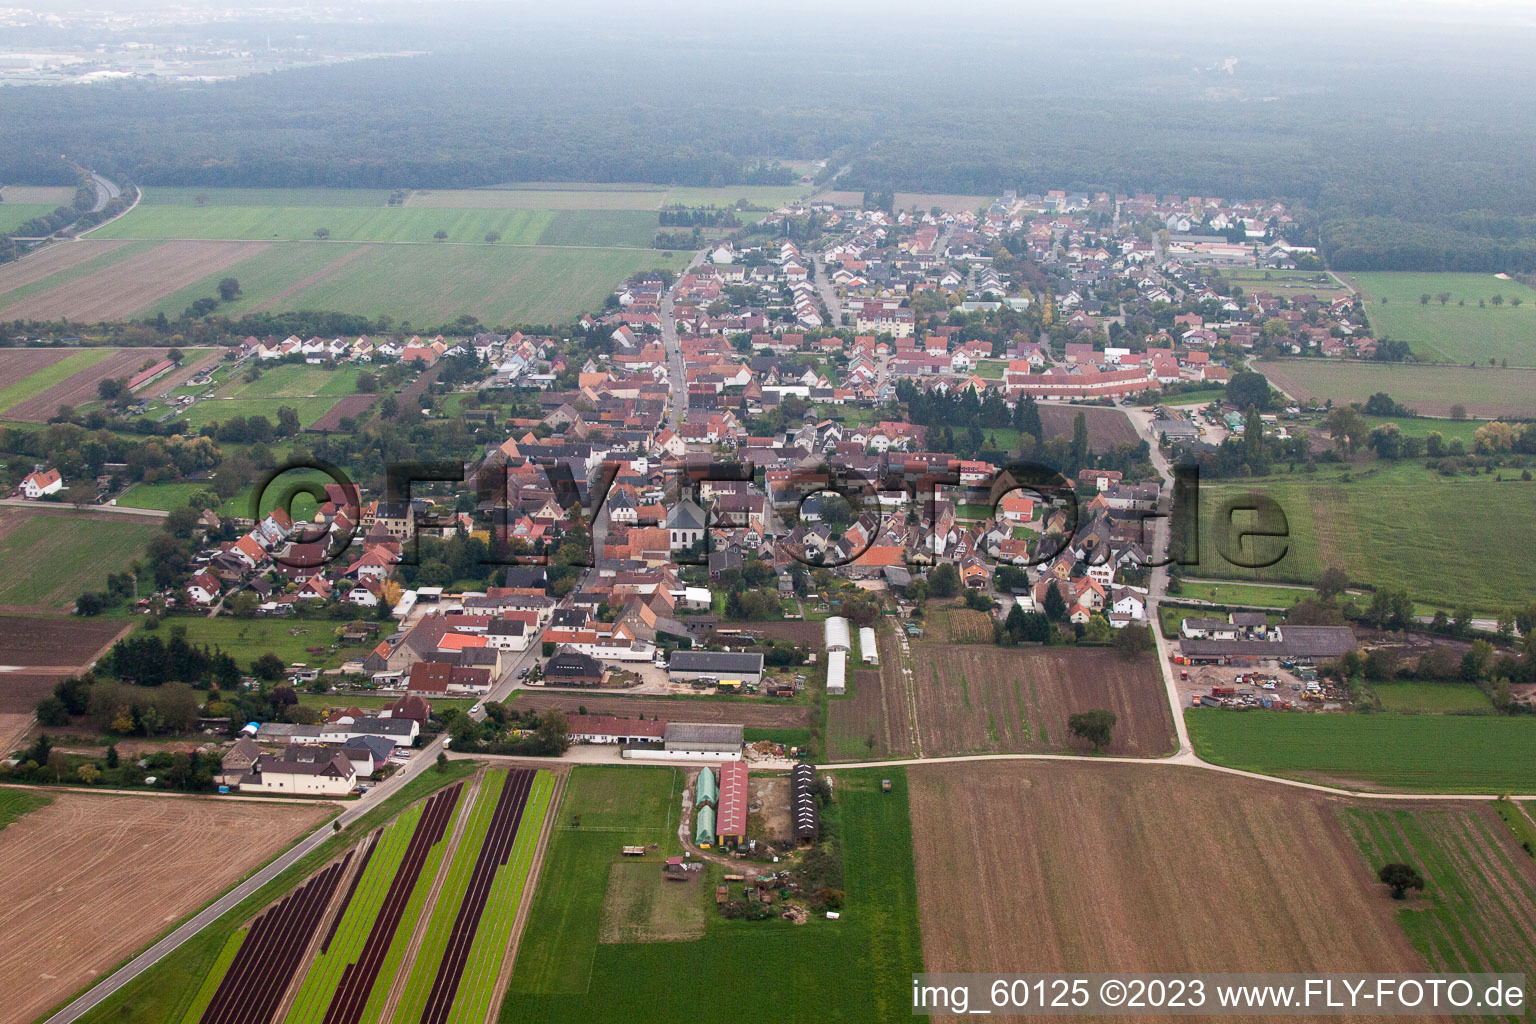 Bird's eye view of Lingenfeld in the state Rhineland-Palatinate, Germany